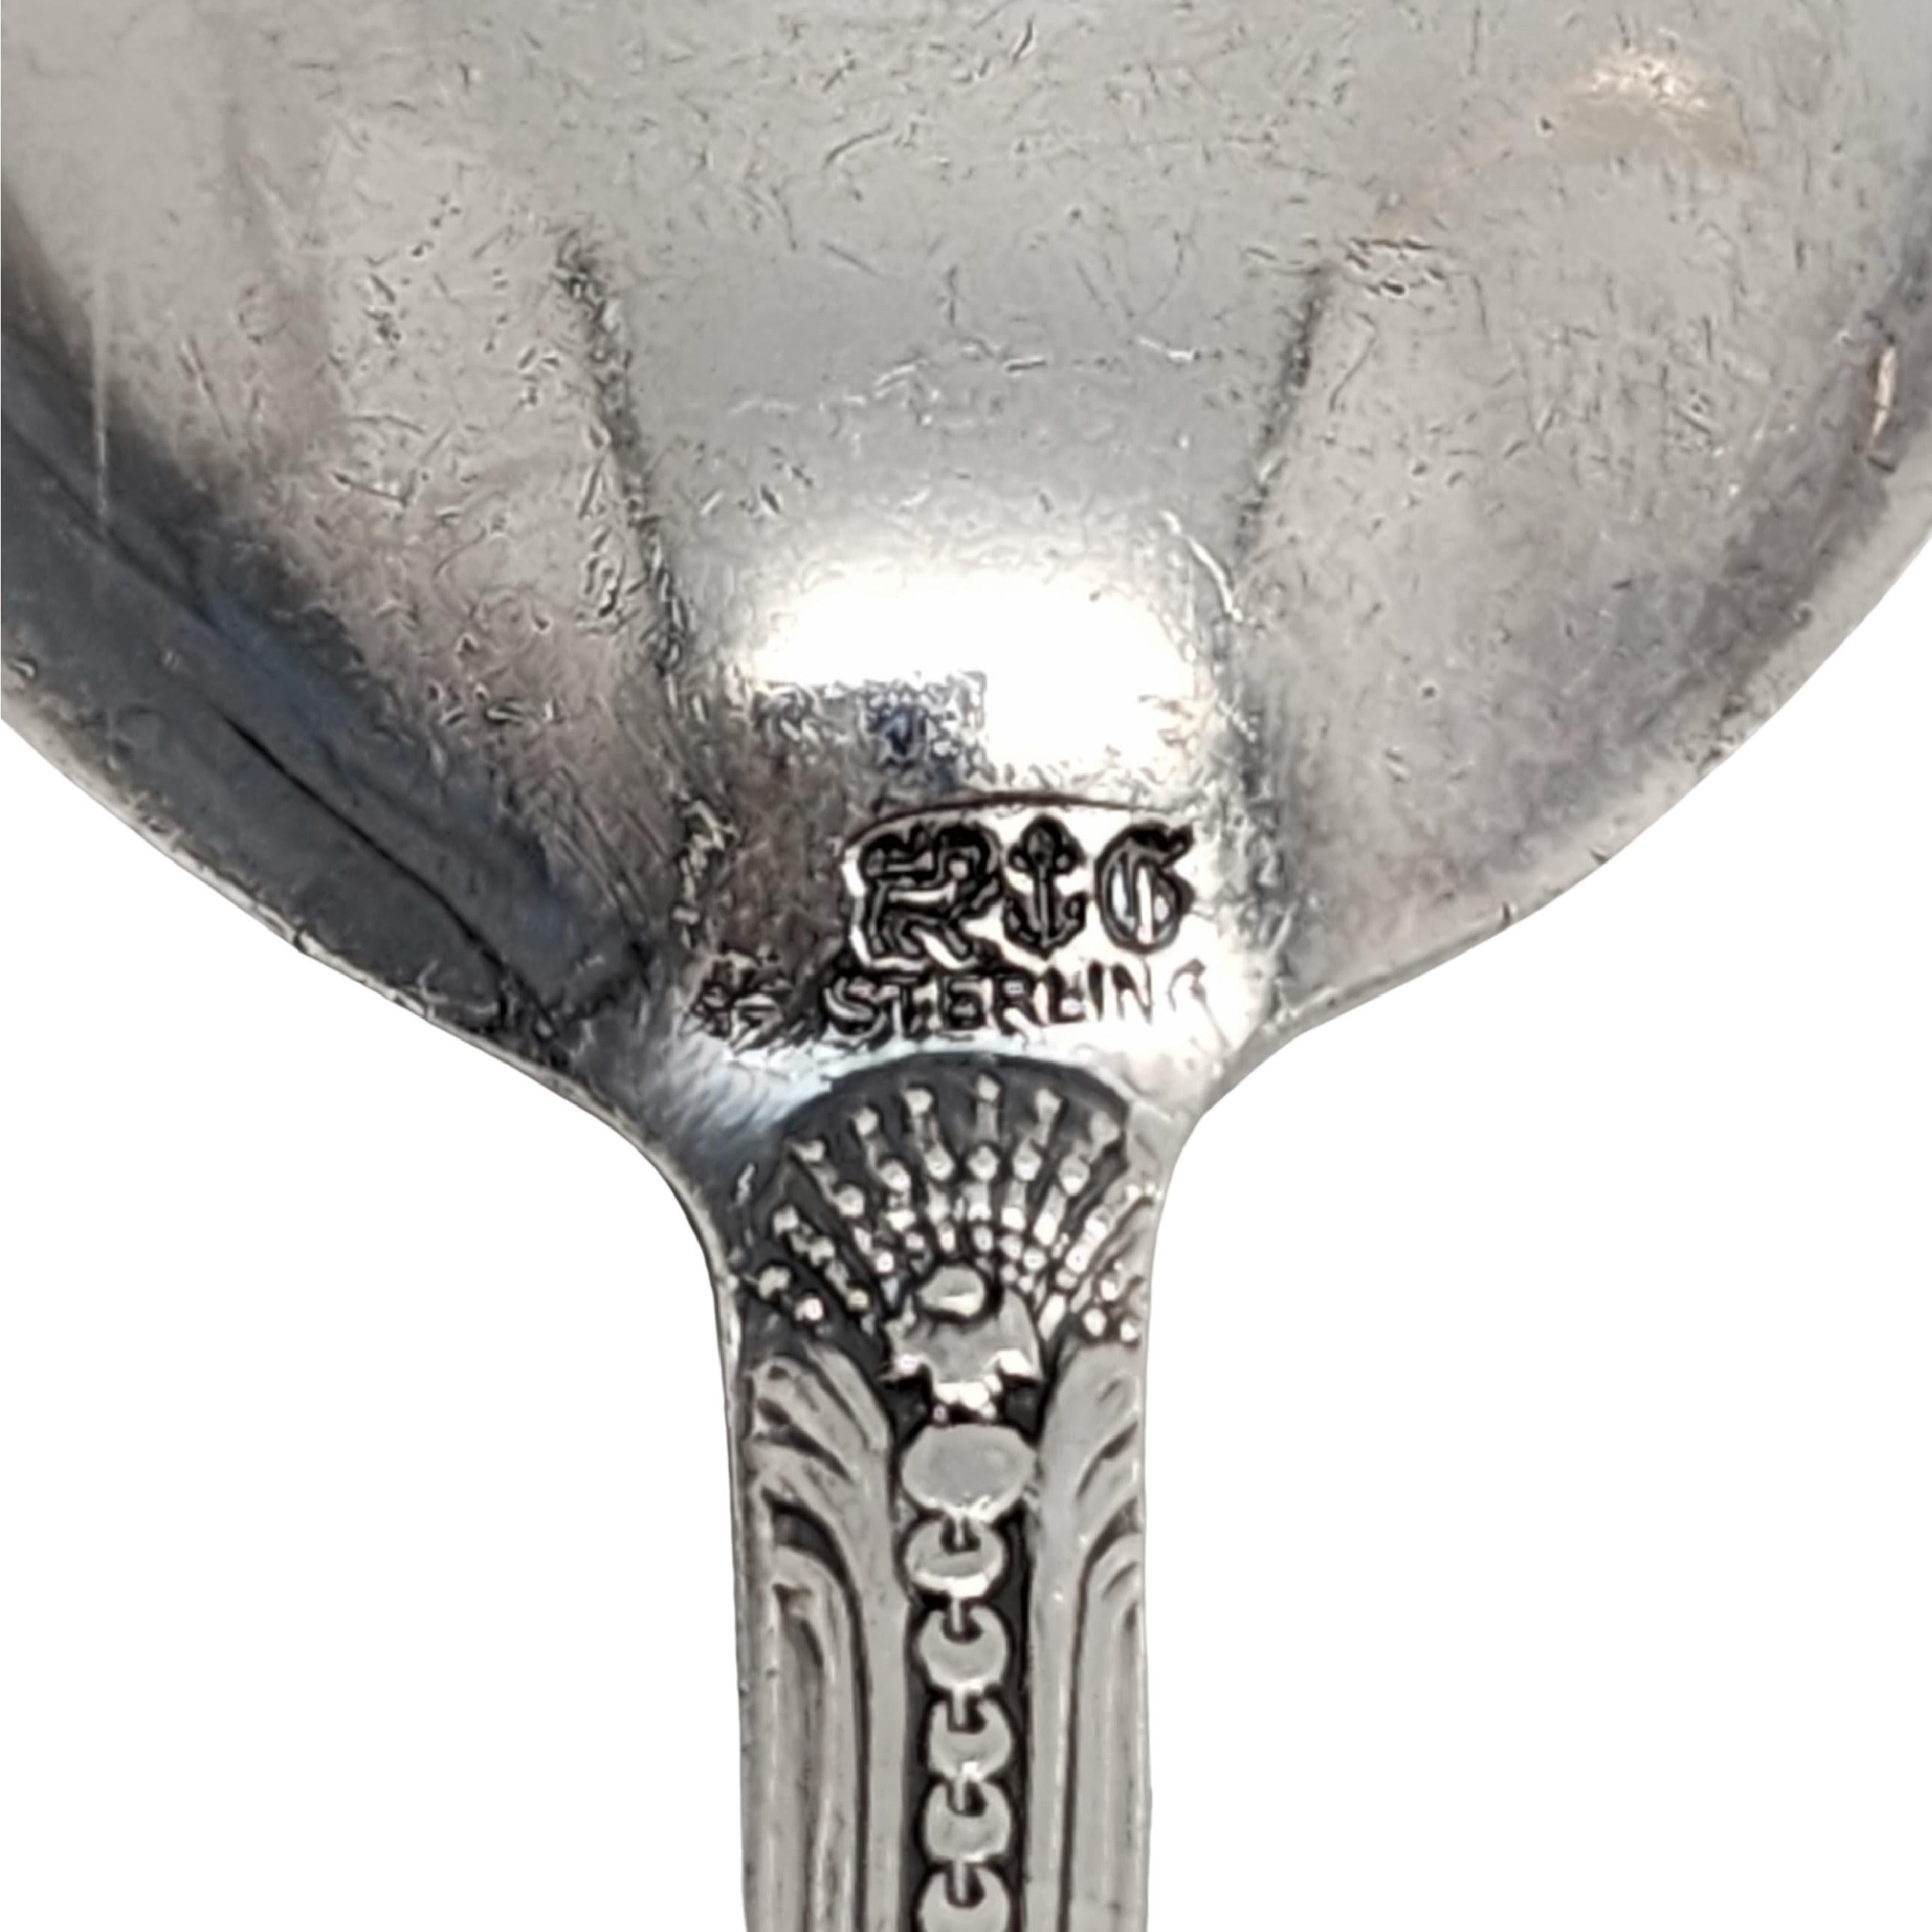 Sterling silver pap spoon by Gorham in the Versailles pattern.

No monogram

Gorham's Versailles is a multi motif pattern designed by Antoine Heller in 1885. Named for the Palace of Versailles, the pattern depicts ornate scenes of Classical figures.